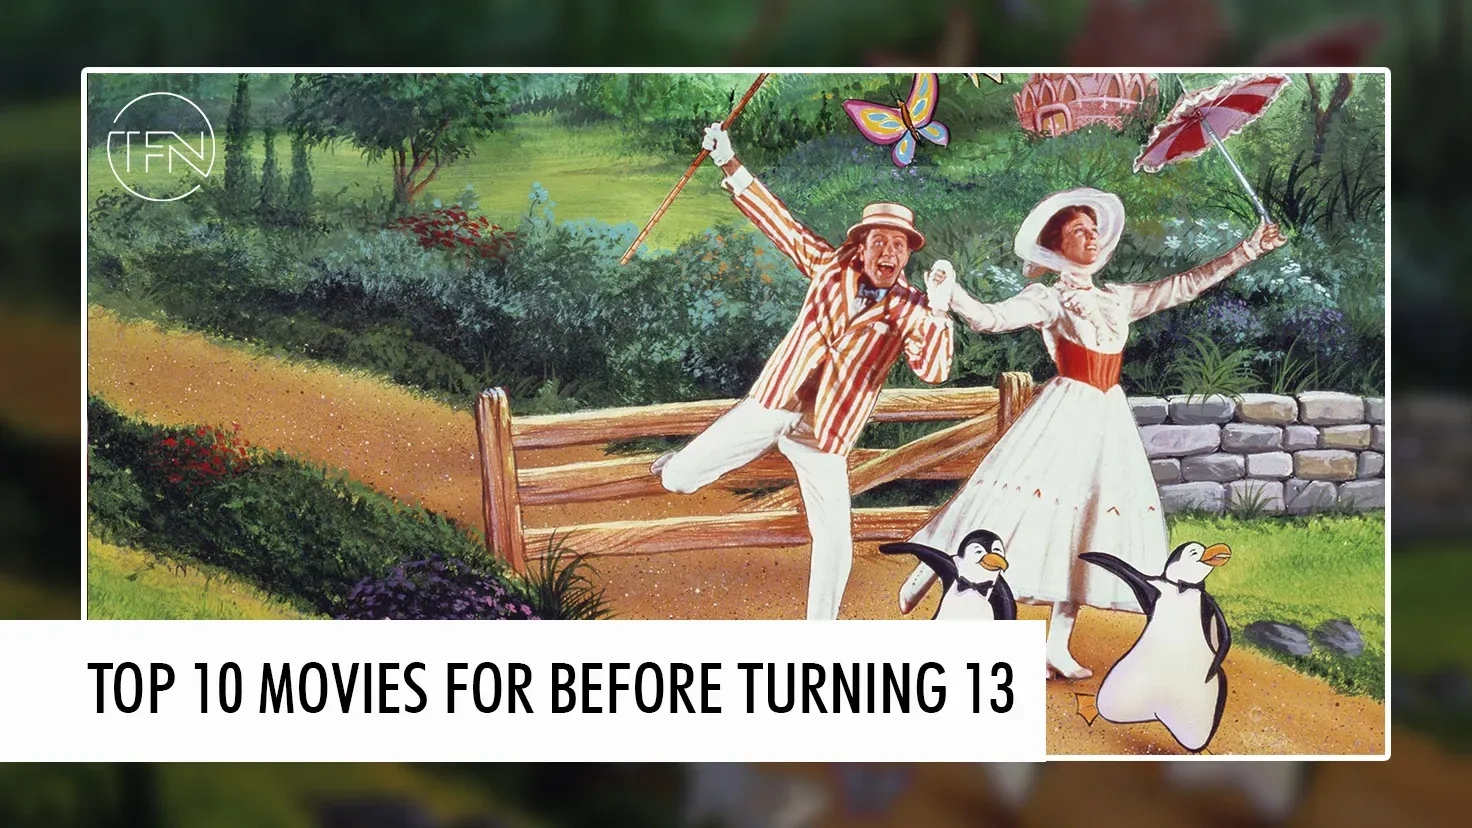 Top 10 Essential Movies your Child must see (before turning 13)